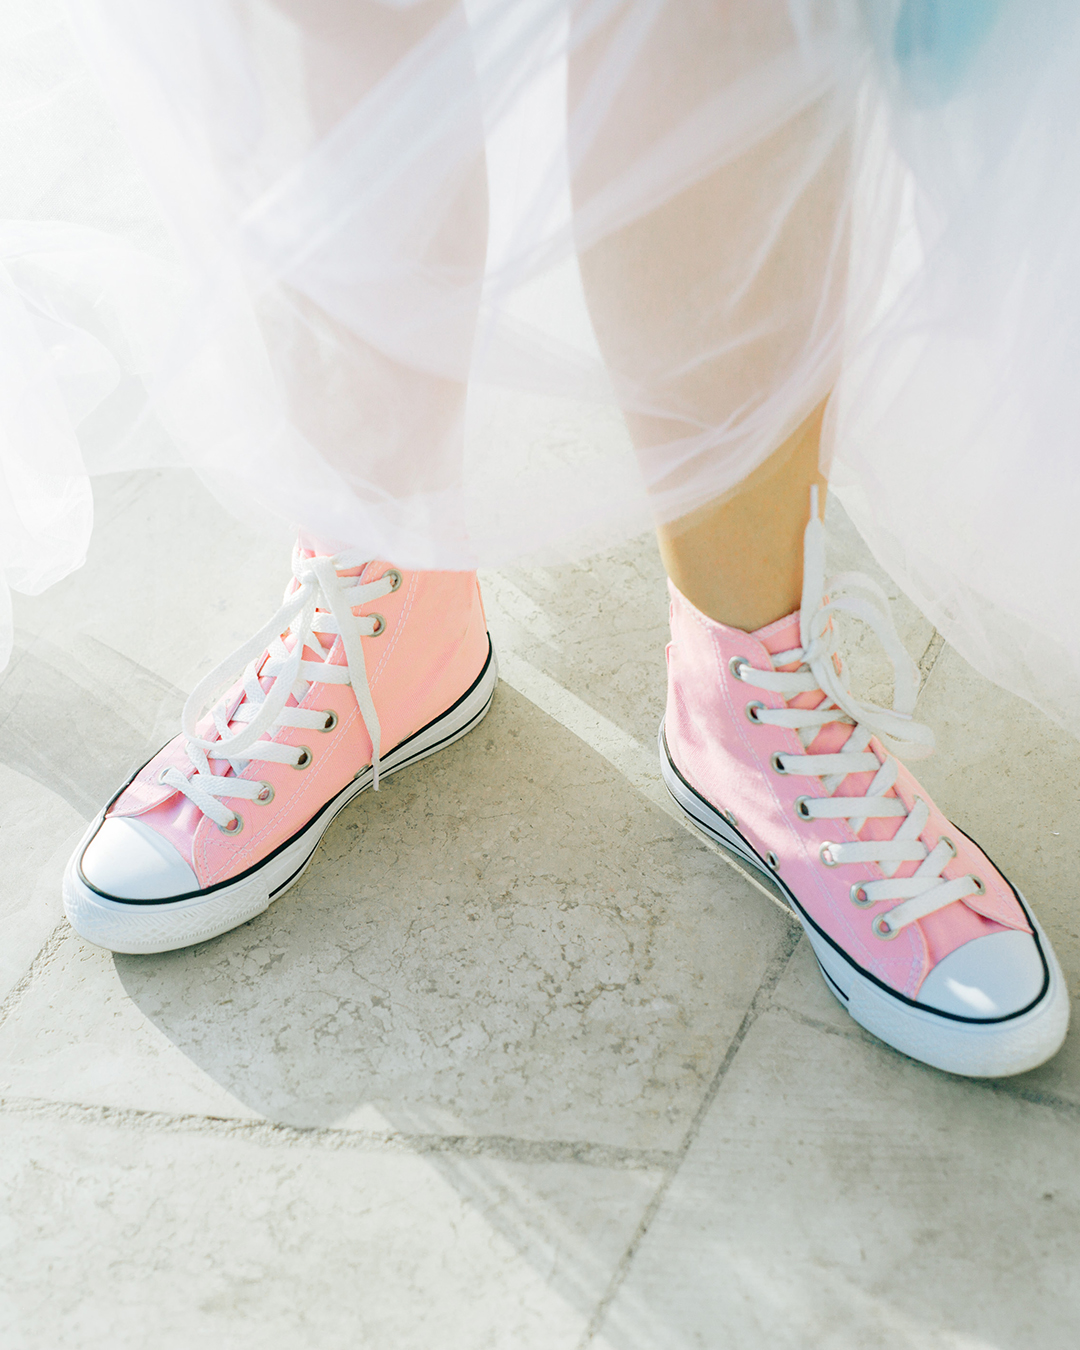 vans non traditional wedding shoes pink comfortable shutterstock